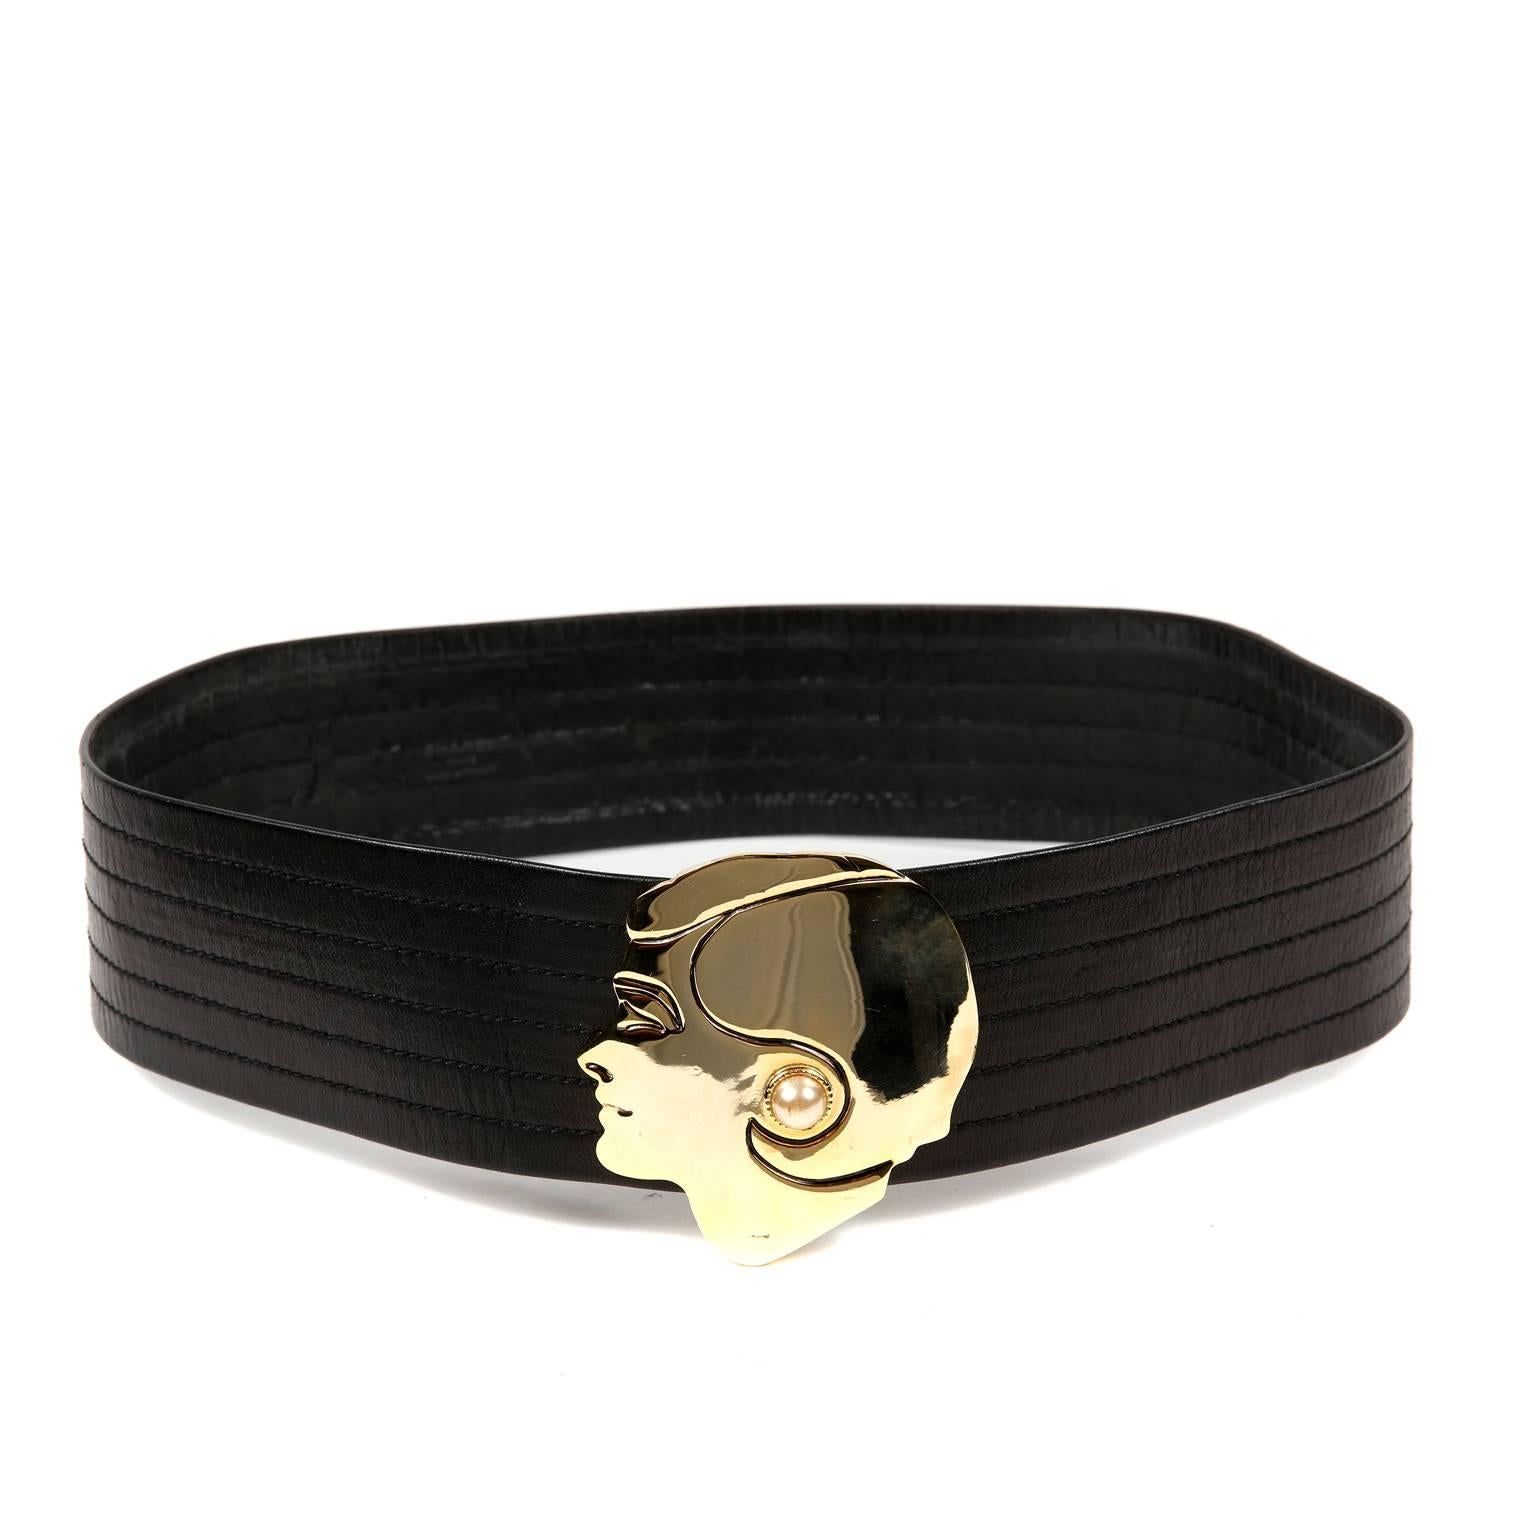 Chanel Black Leather Gold Face Belt- Excellent Condition

Black leather stitched belt with a stunning gold woman’s face in profile for the buckle.  Adorned with a pearl “earring.”